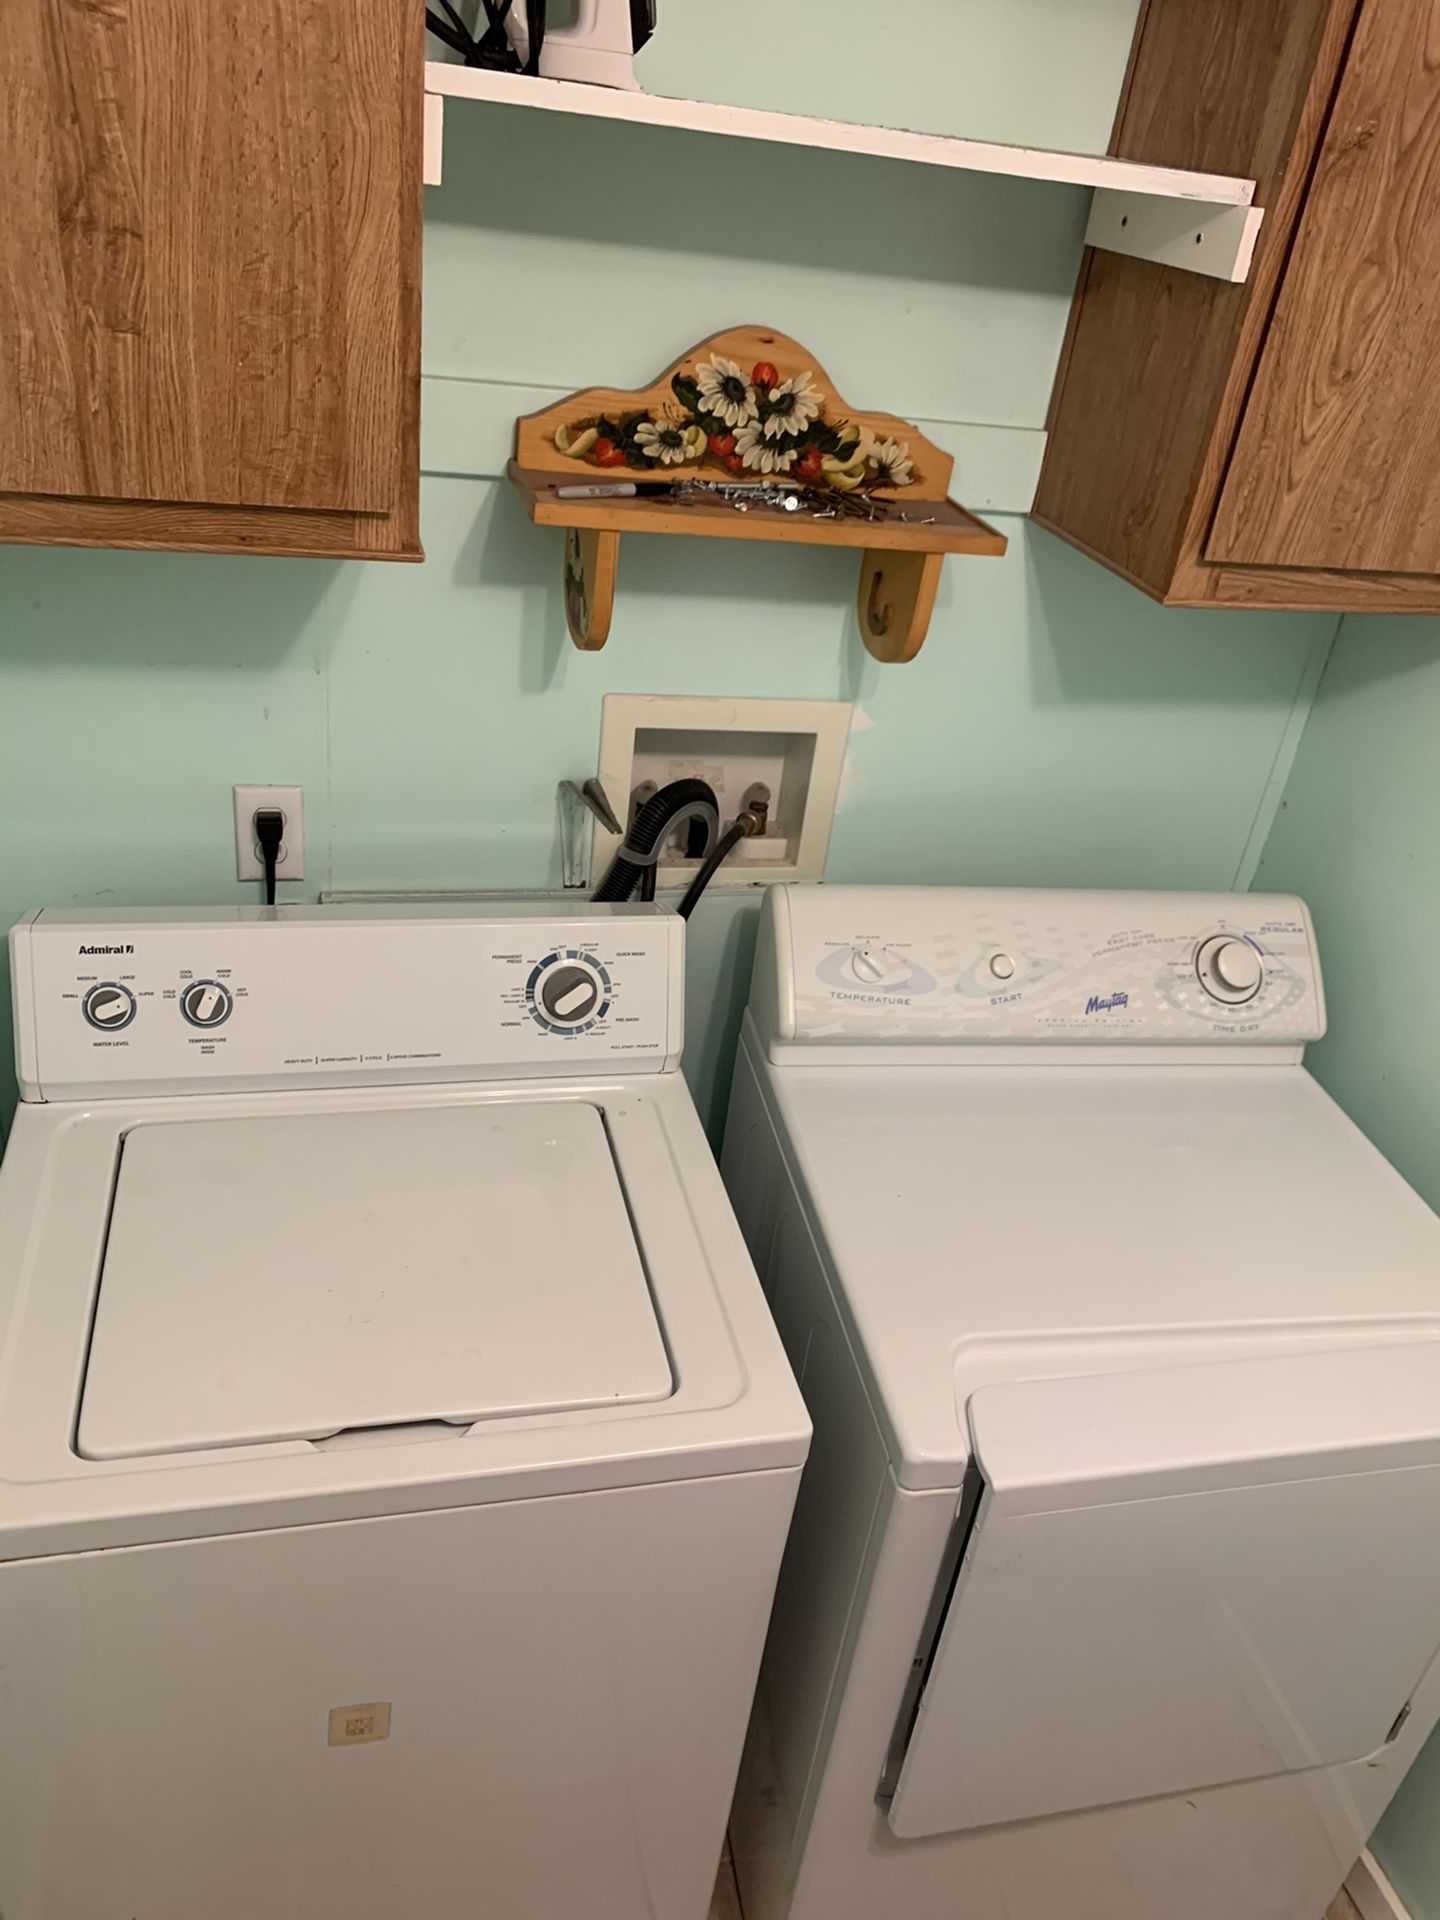 Washer and dryer make offer